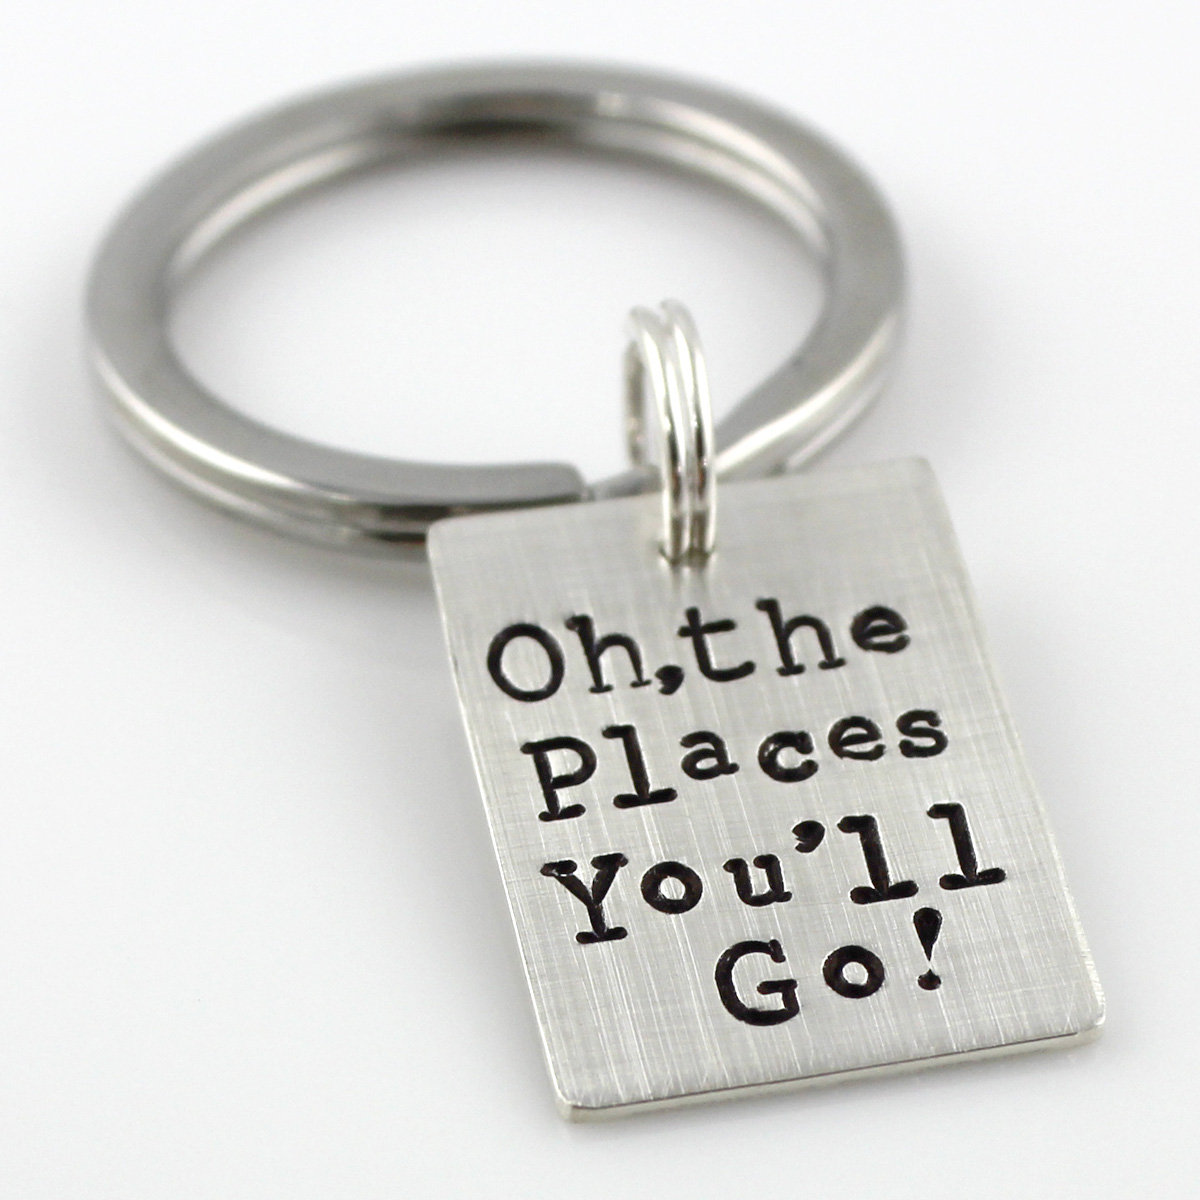 Oh, the Places You'll Go! Hand Stamped Sterling Silver Key Chain